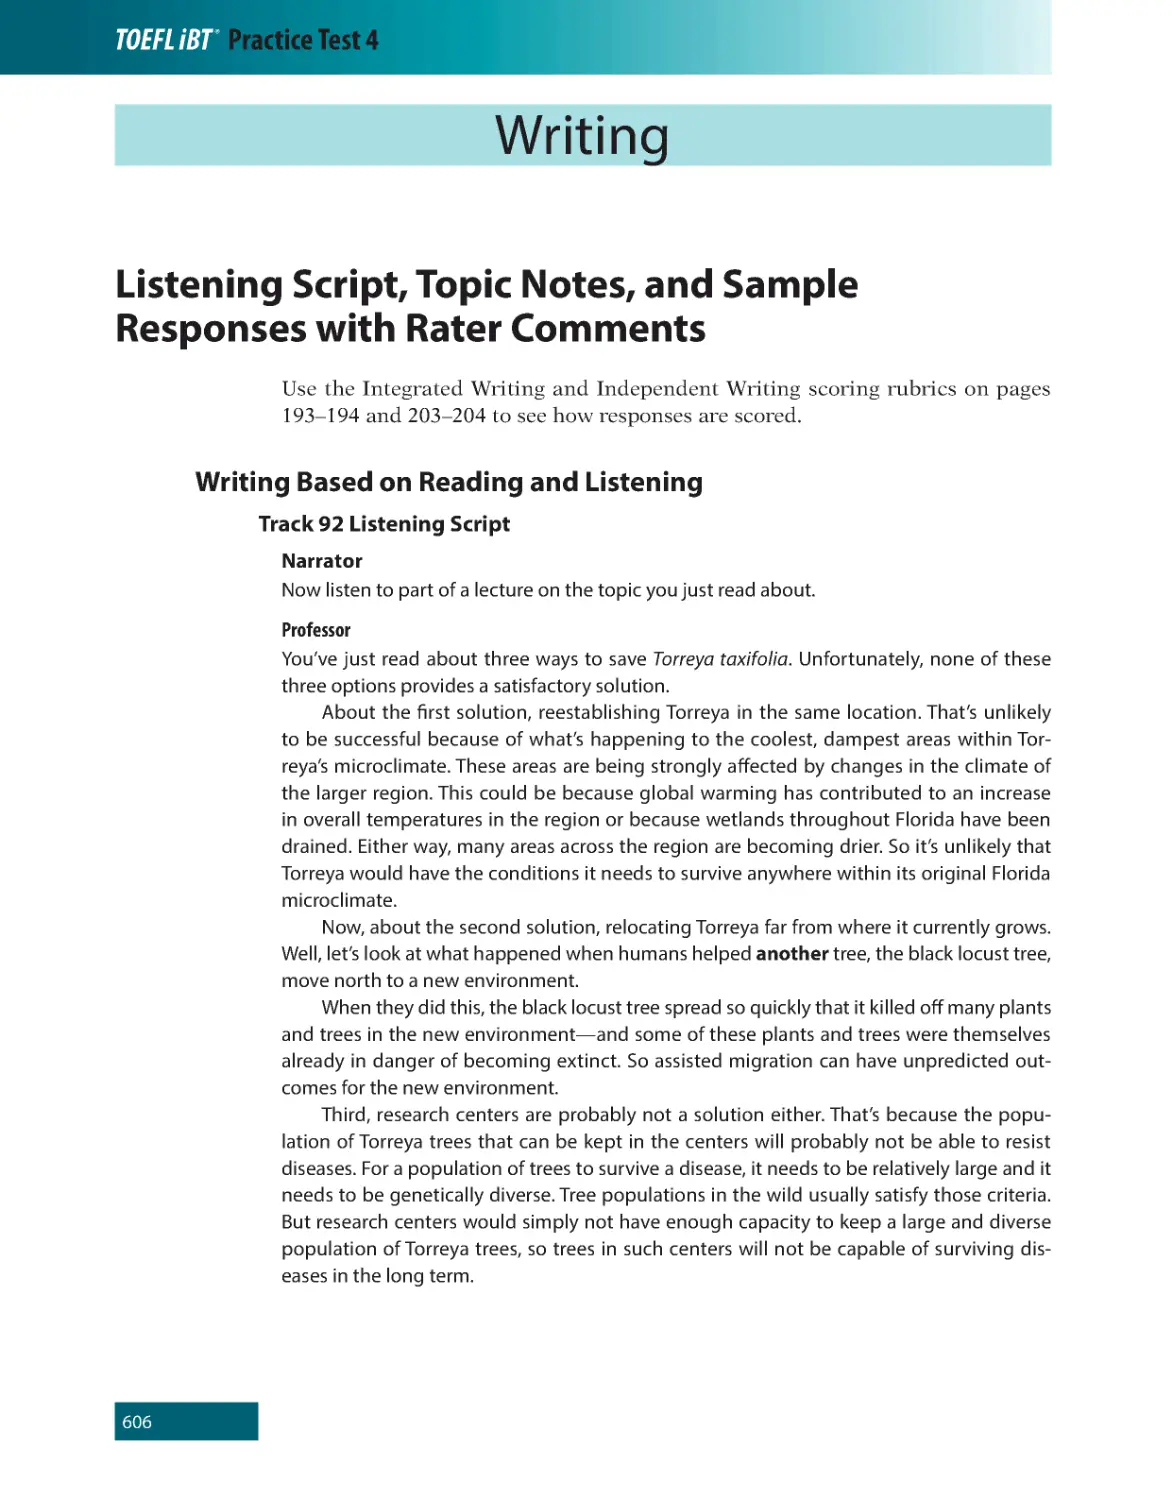 Writing
Listening Script, Topic Notes, and Sample Responses with Rater Comments